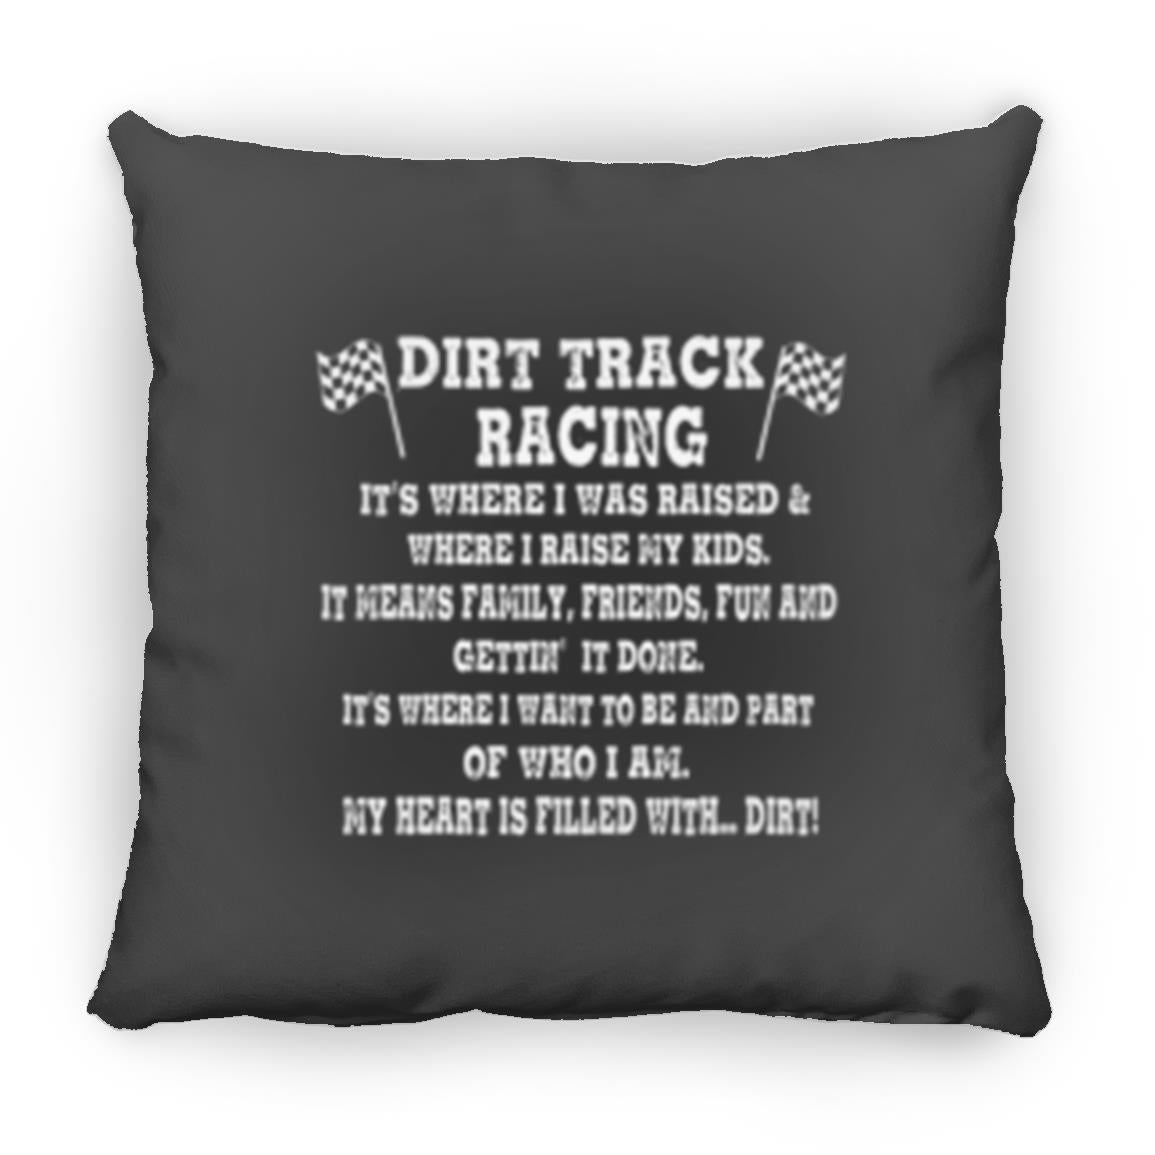 Dirt Track Racing It's Where I Was Raised Large Square Pillow